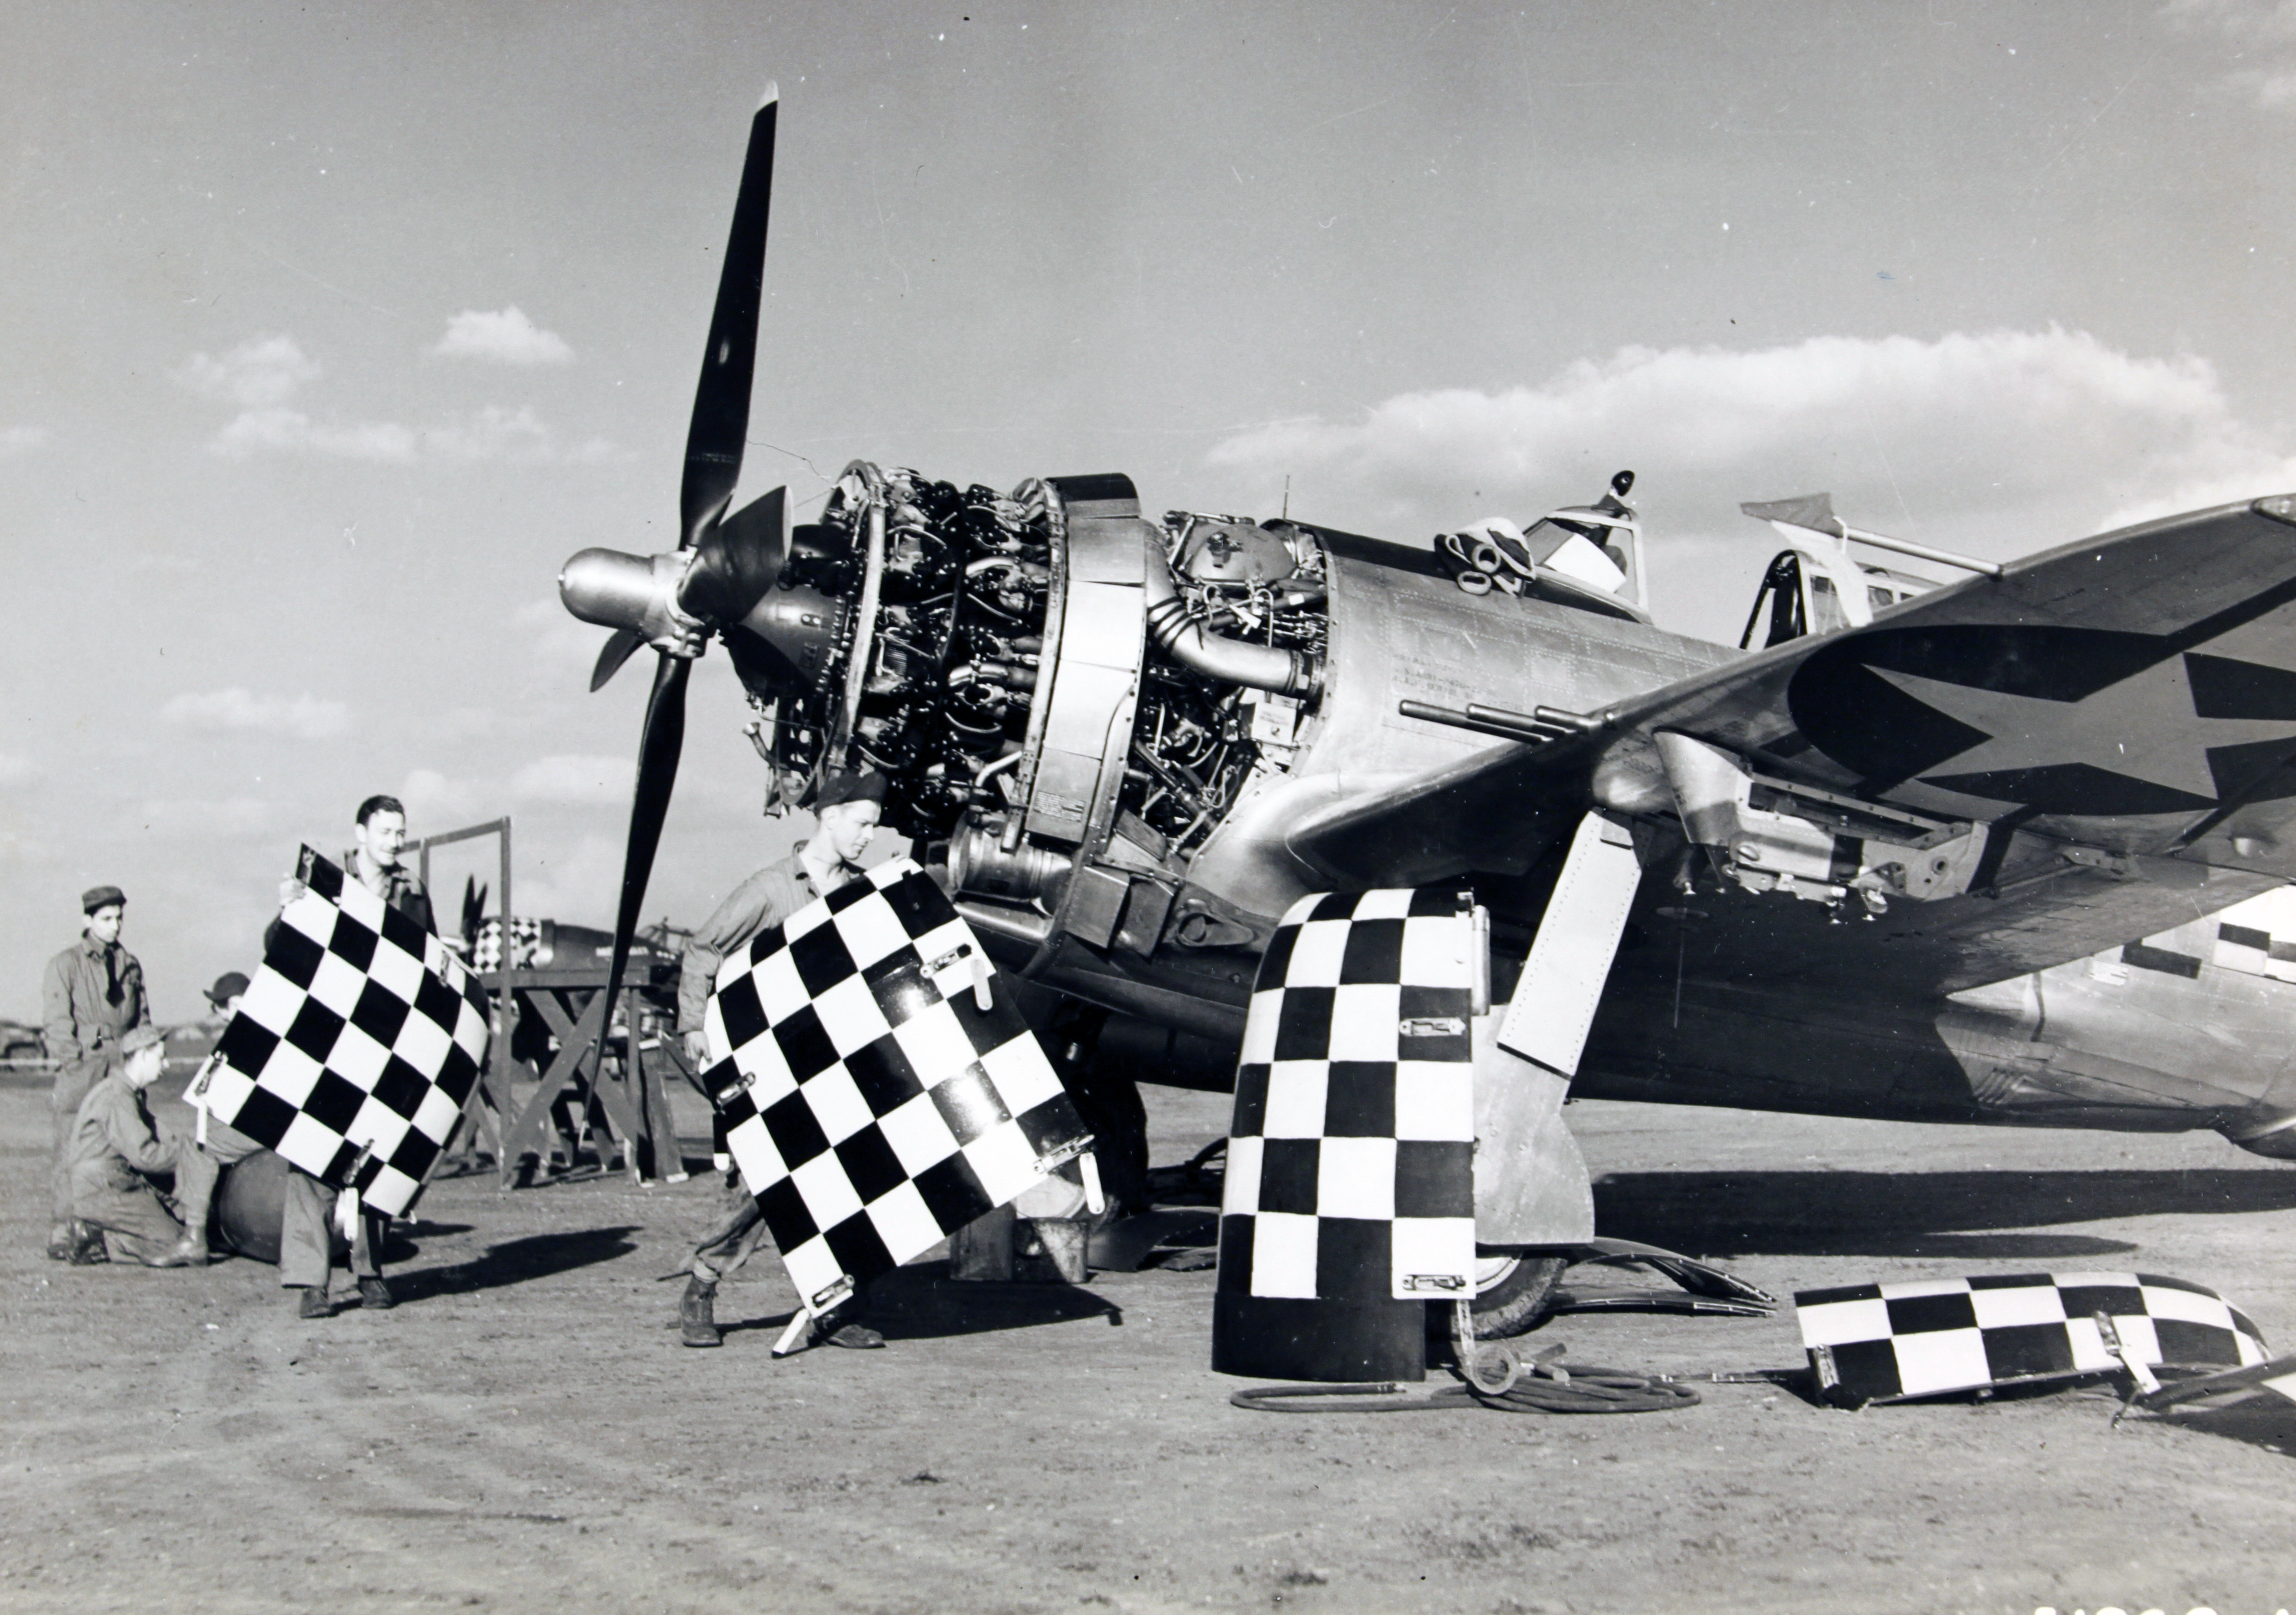 A P-47 is readied for a mission at Duxford